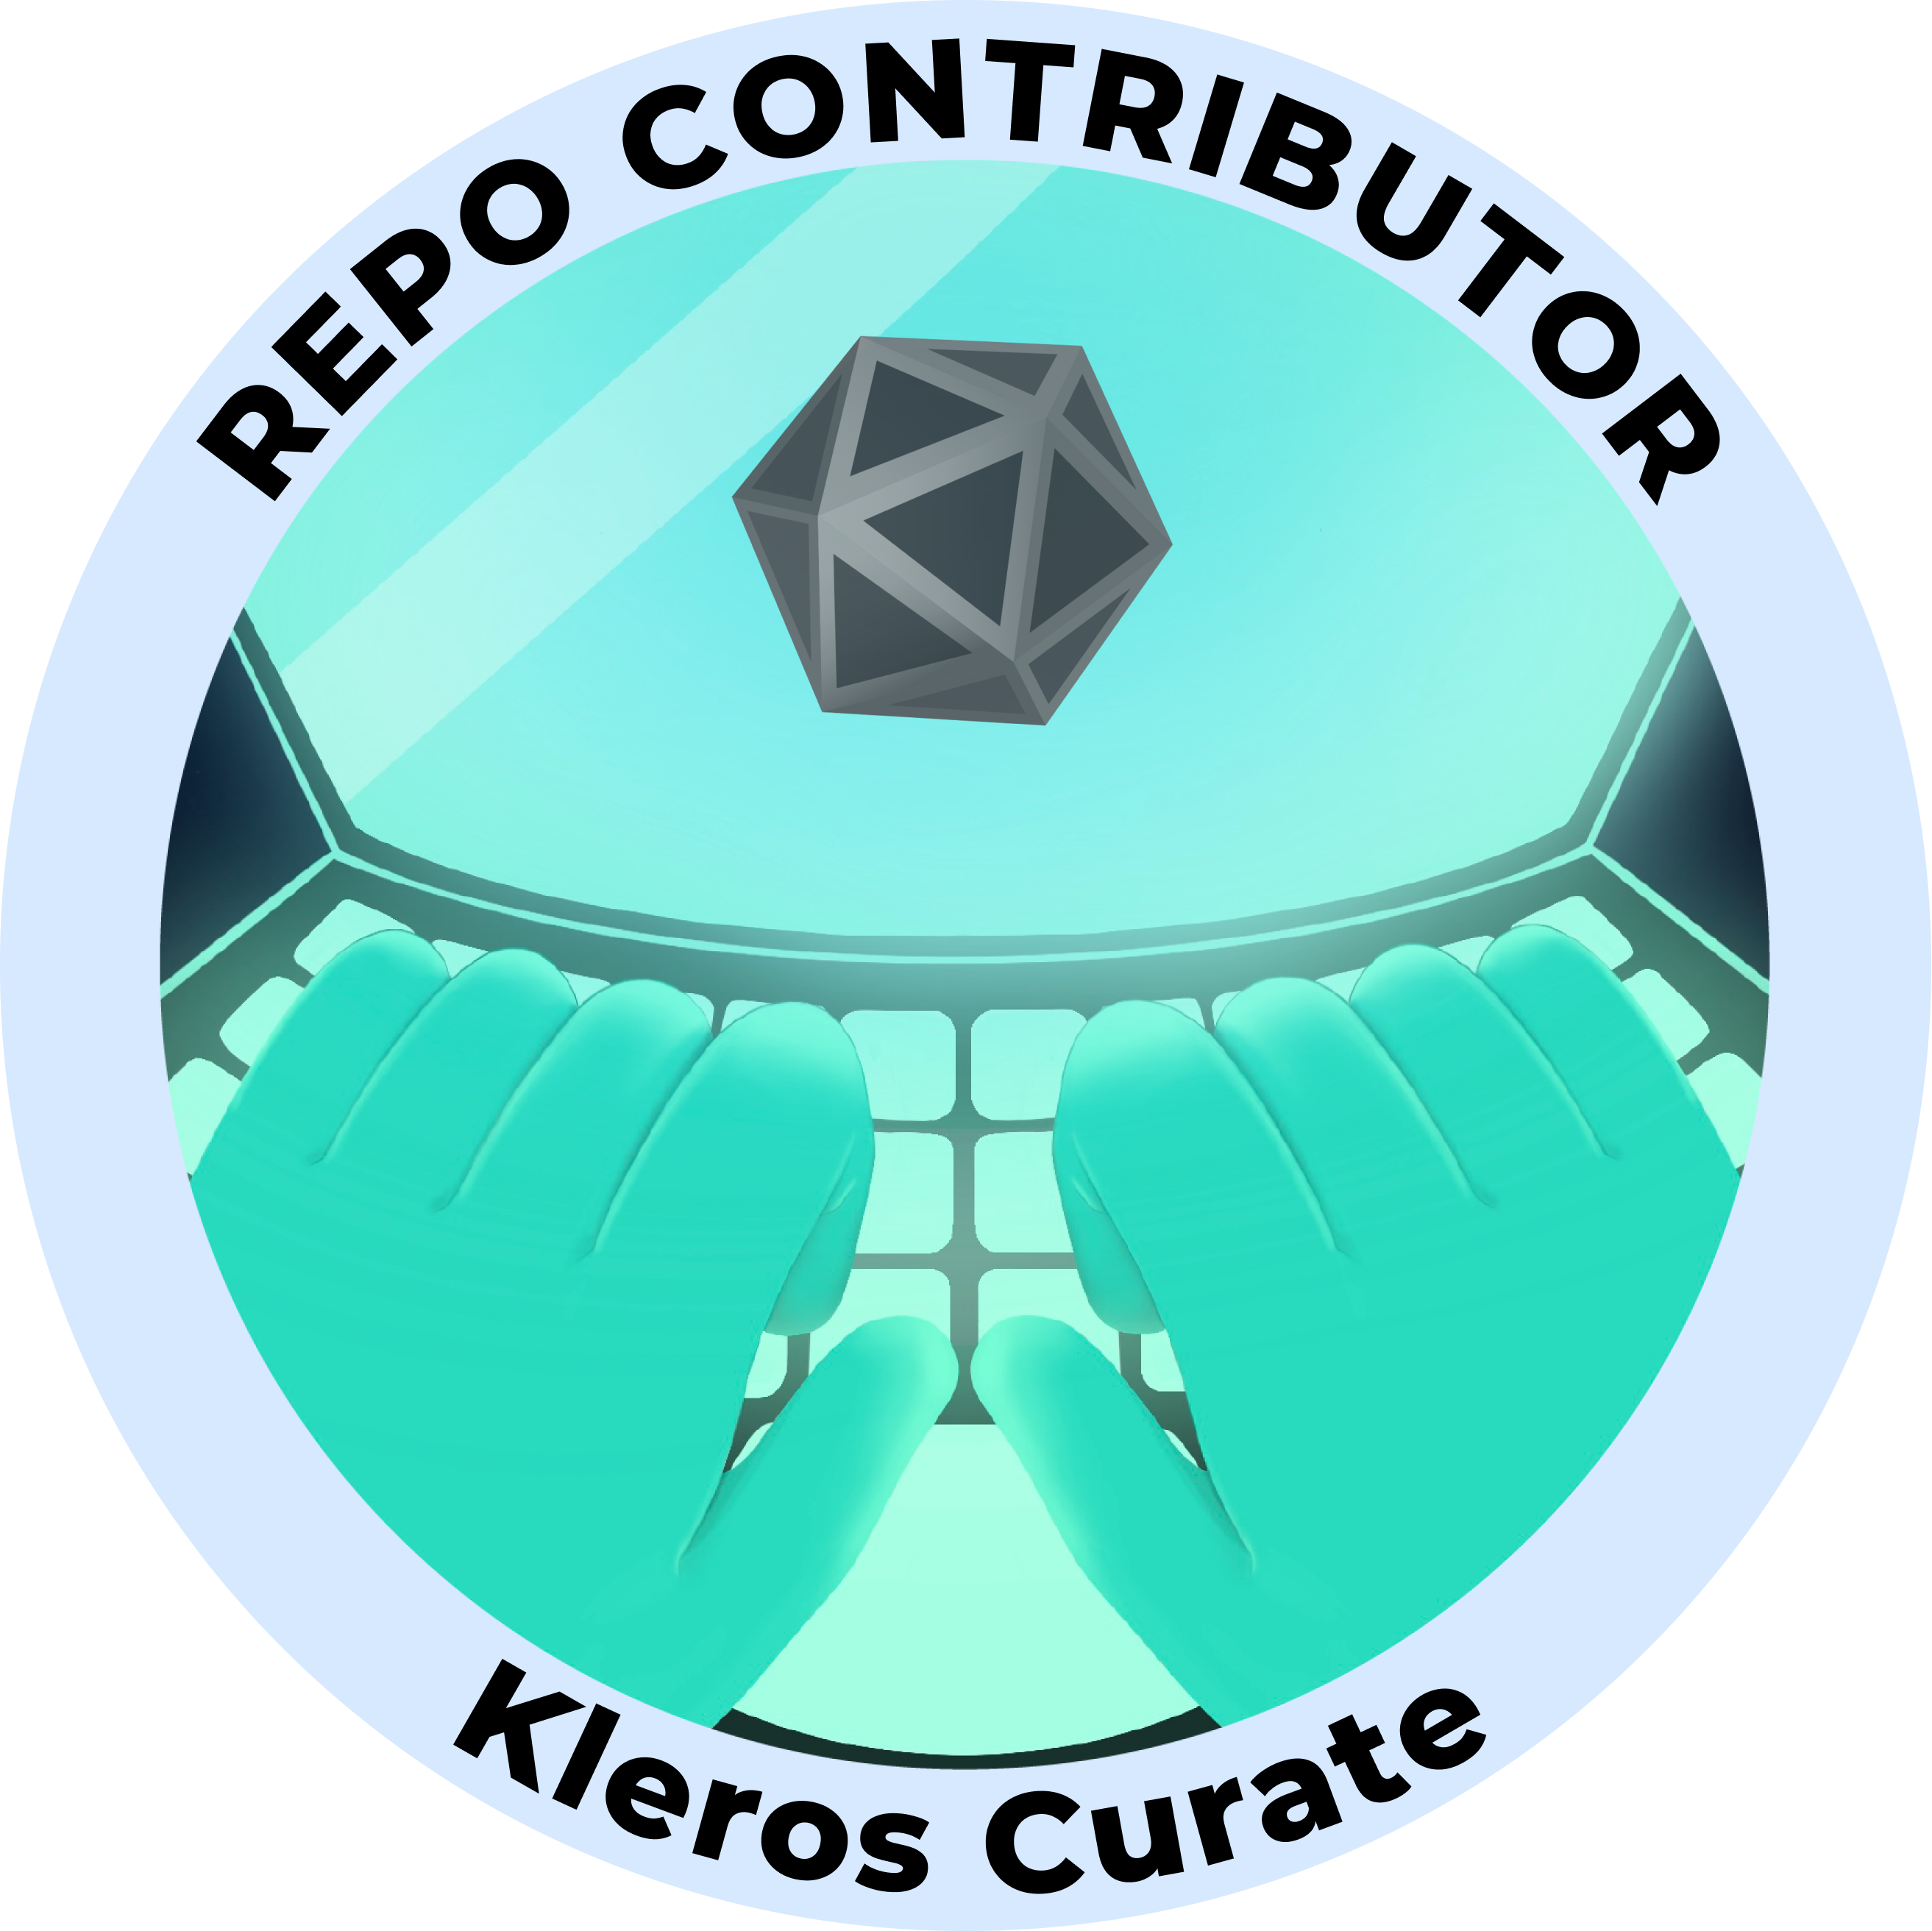 Web3 Badge | Project Contributor: Kleros Curate